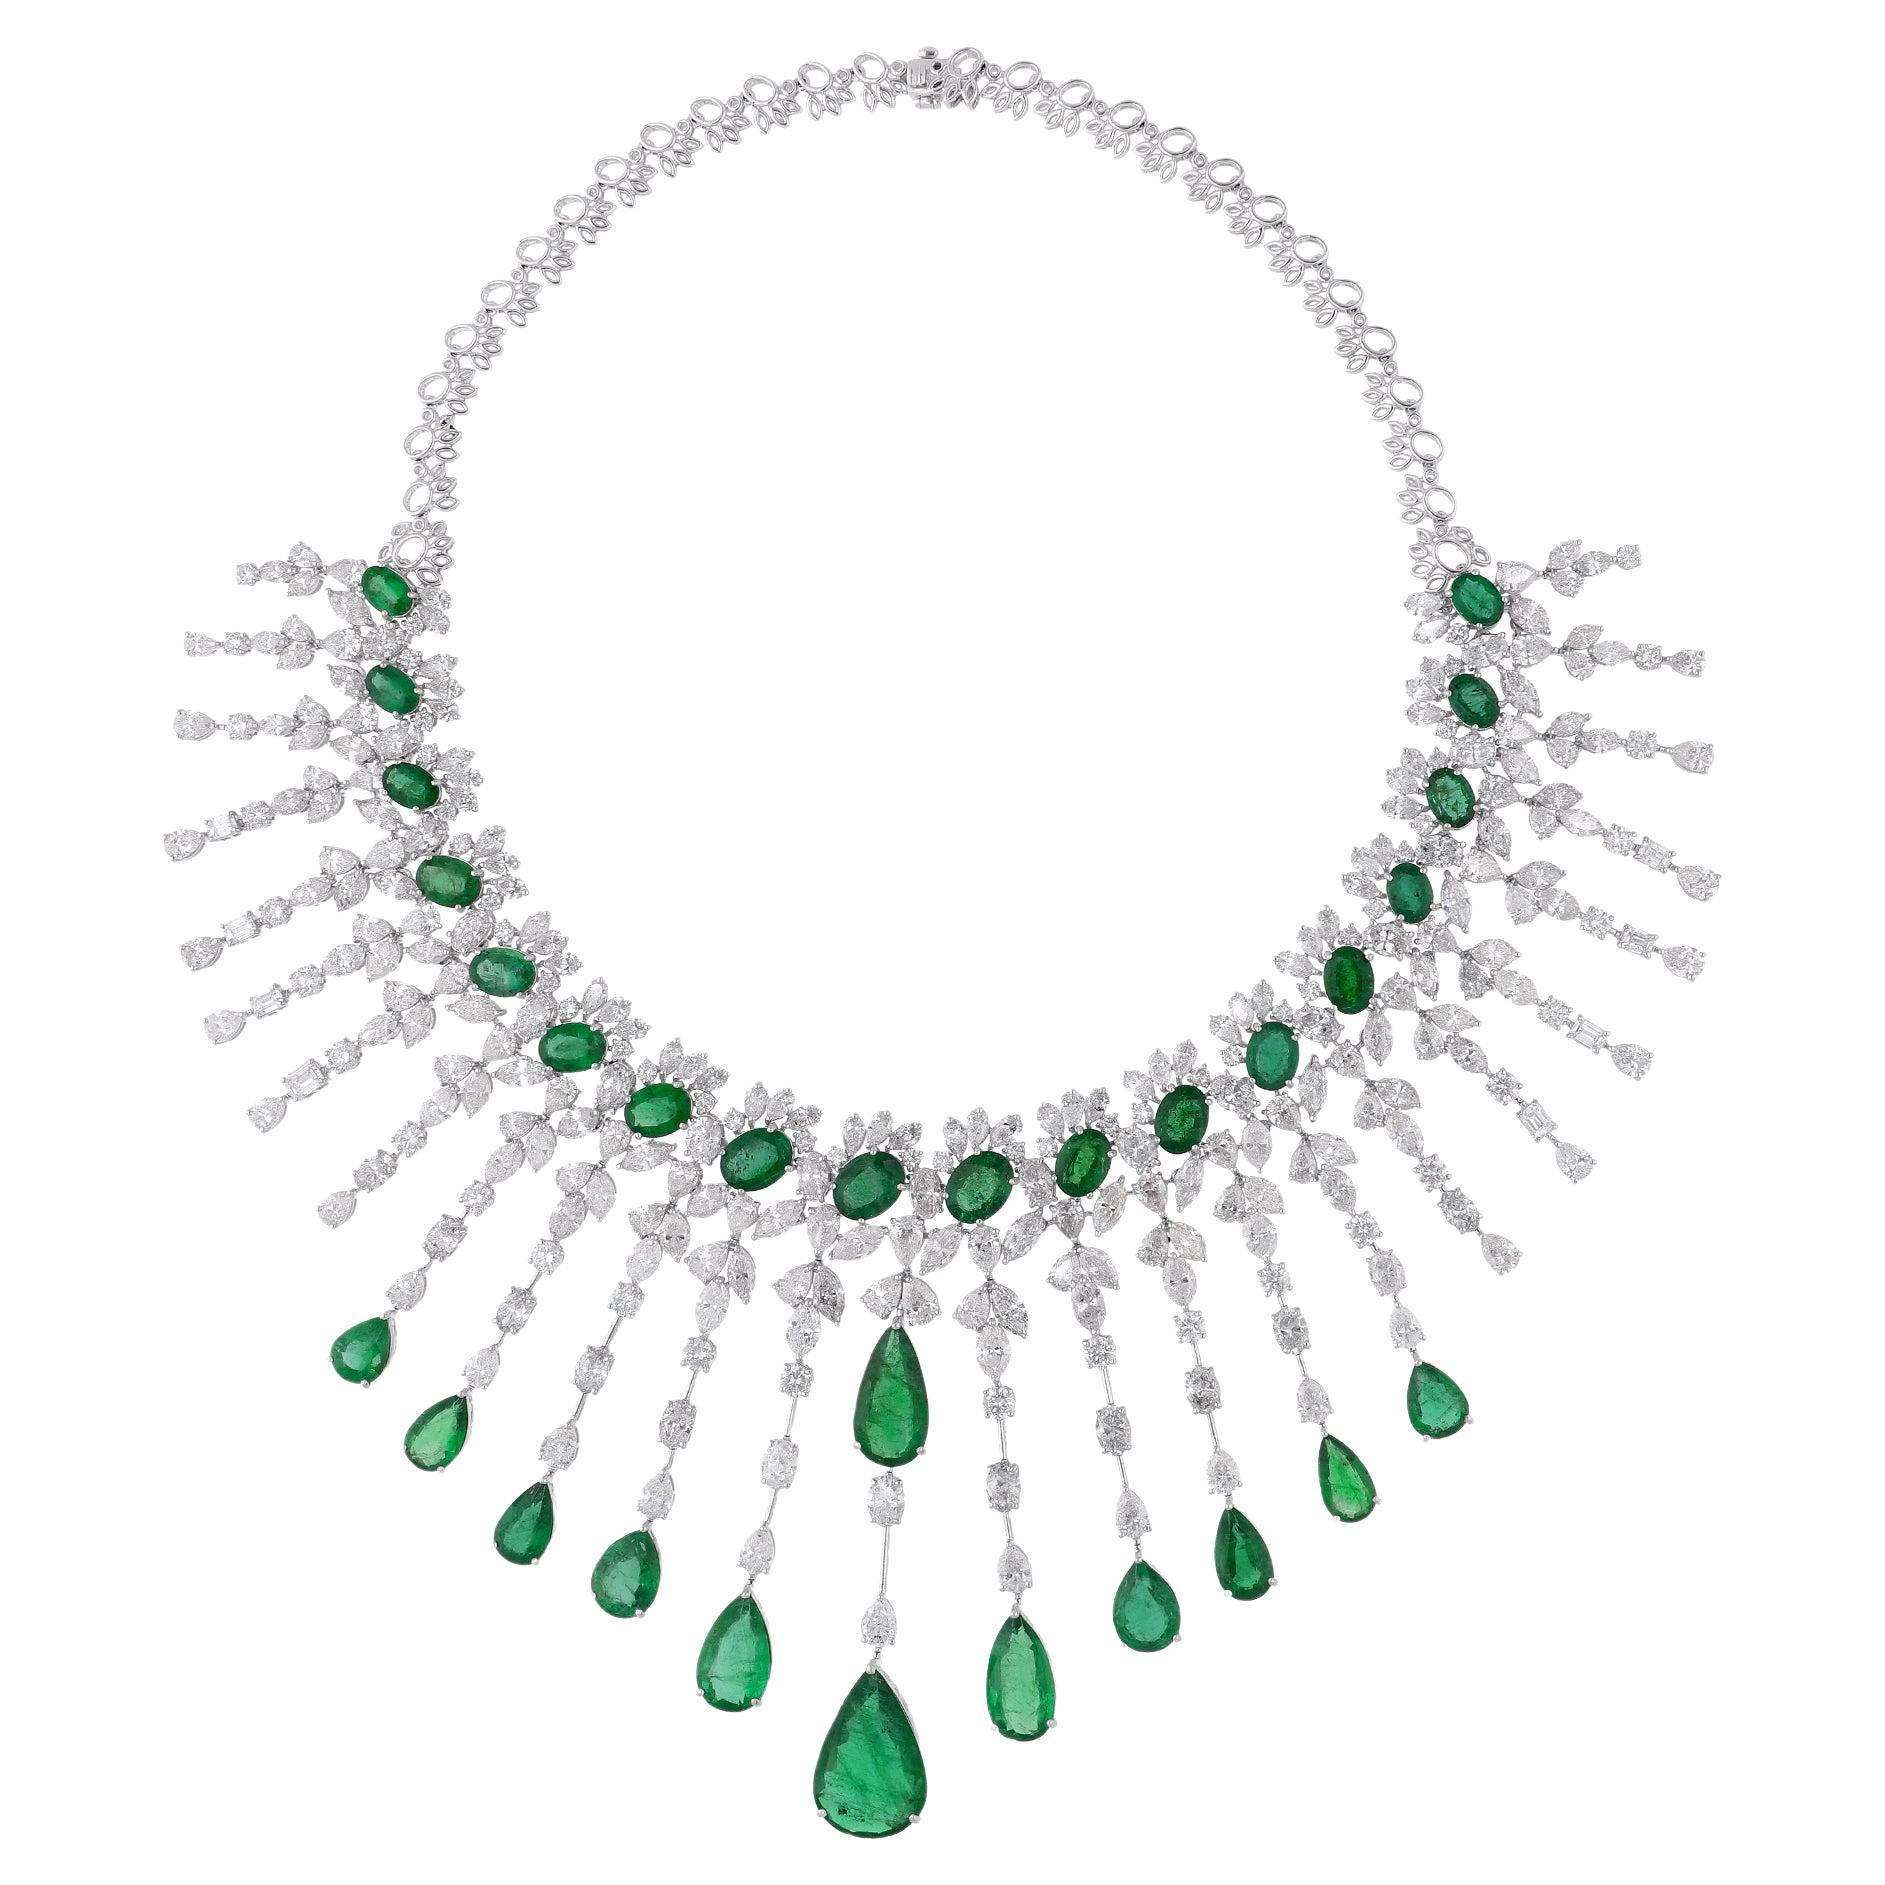 At the center of this captivating choker necklace shines a magnificent Zambian pear emerald gemstone, renowned for its deep green hue and exceptional clarity. Sourced from the prestigious mines of Zambia, this emerald exudes prestige and luxury,